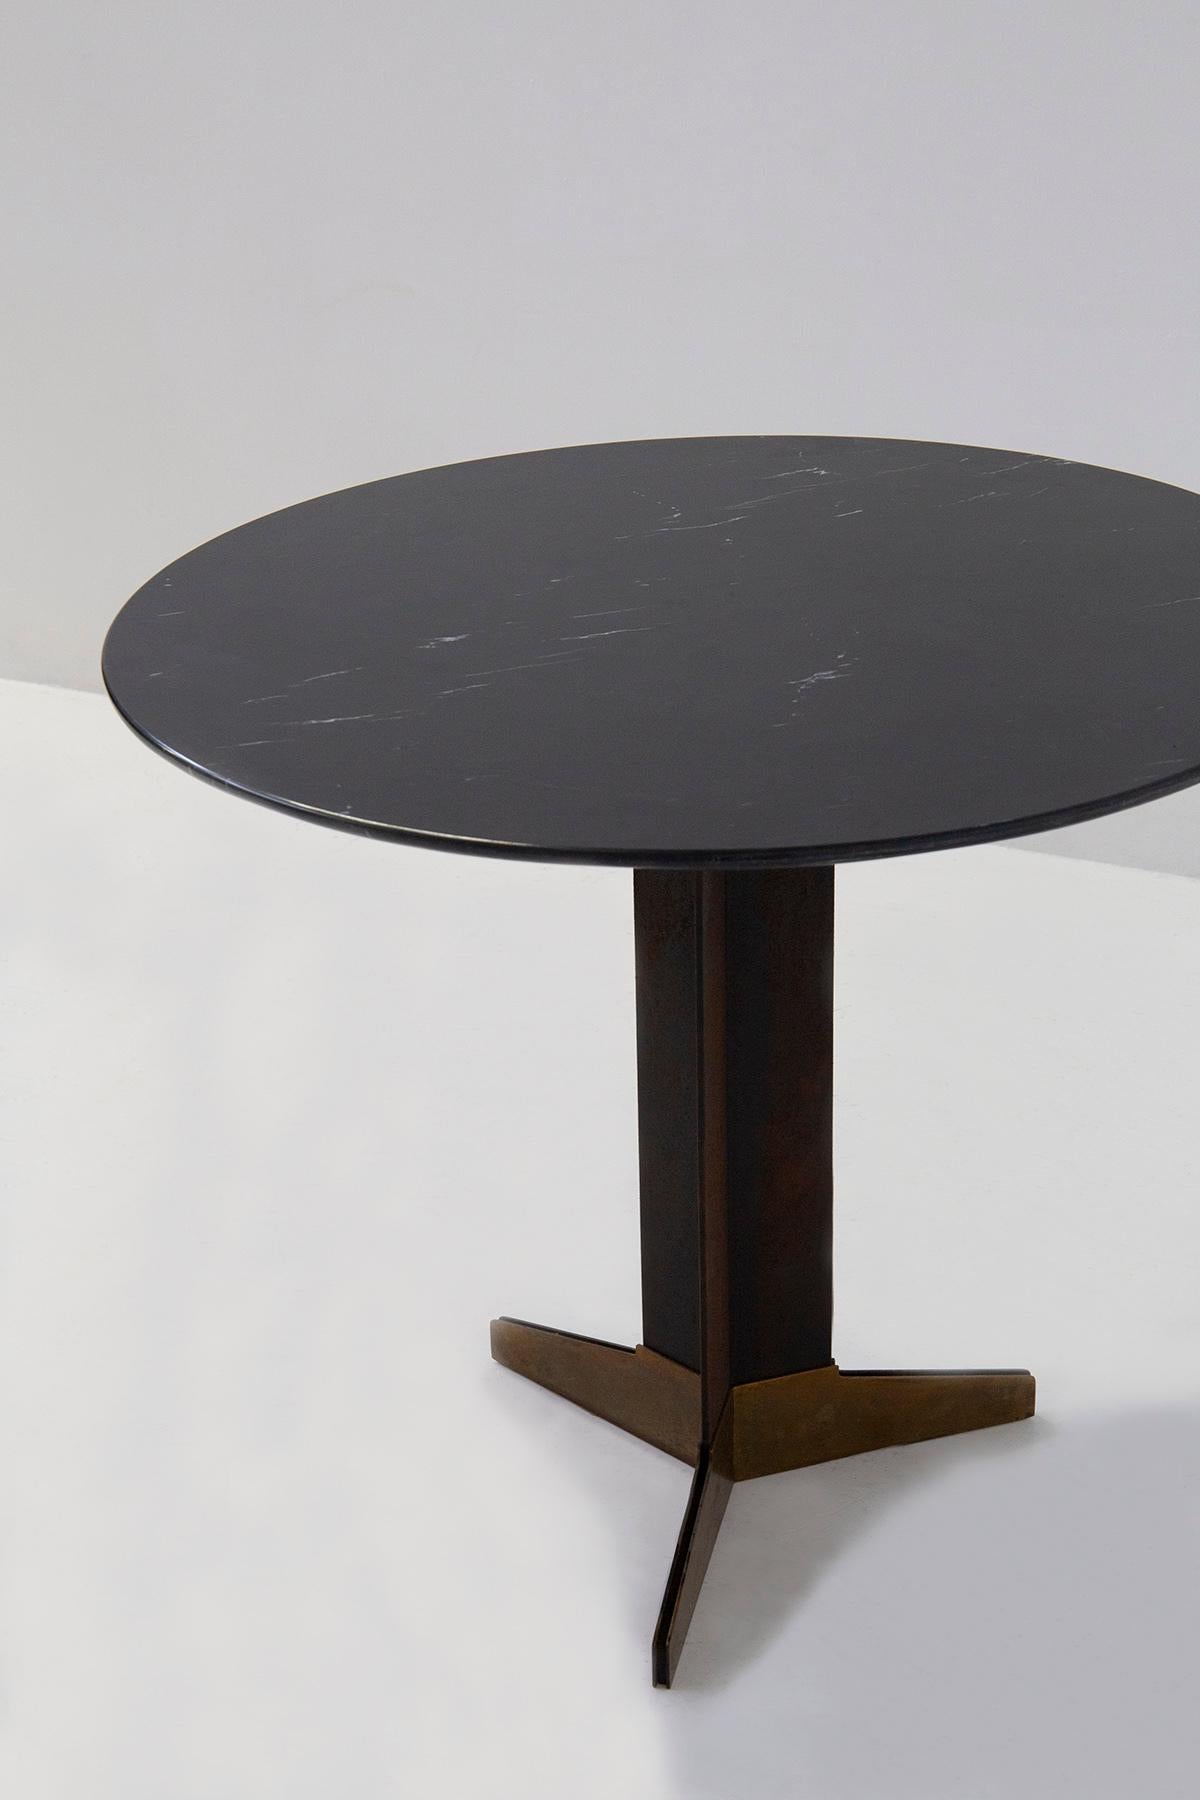 Mid-20th Century Ignazio Gardella Occasional marble and brass round table  For Sale